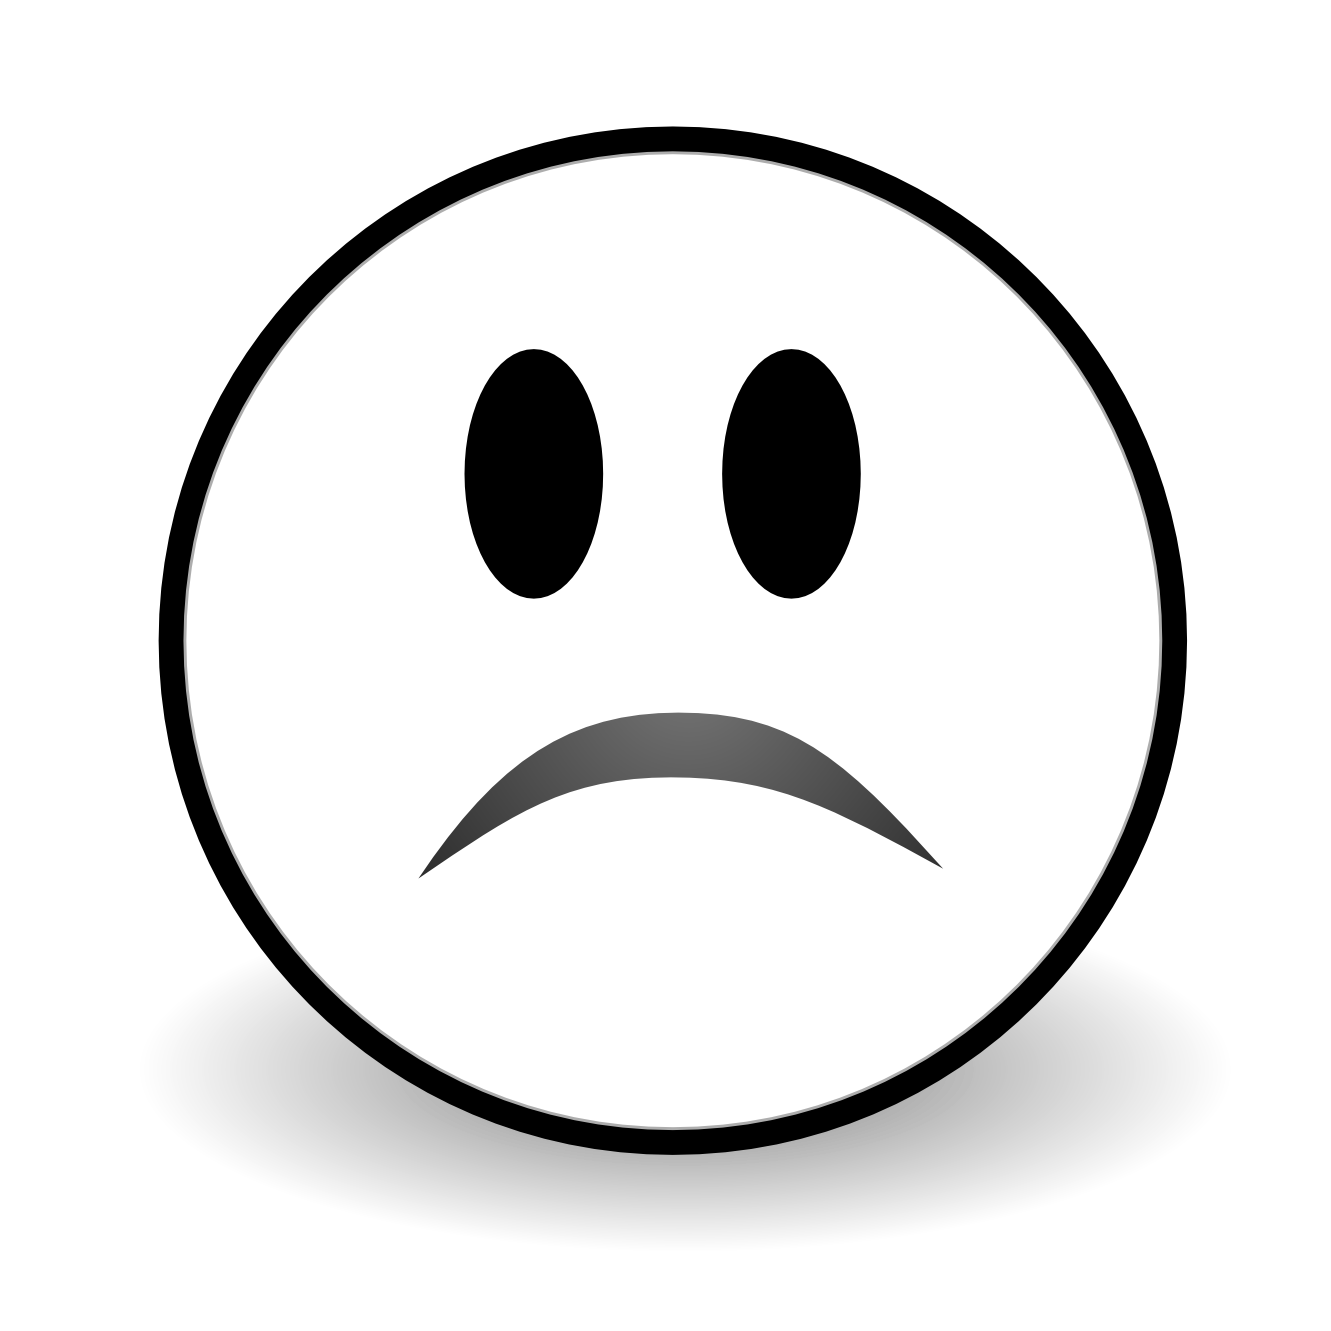 Emotions clipart interesting. Sad face black and